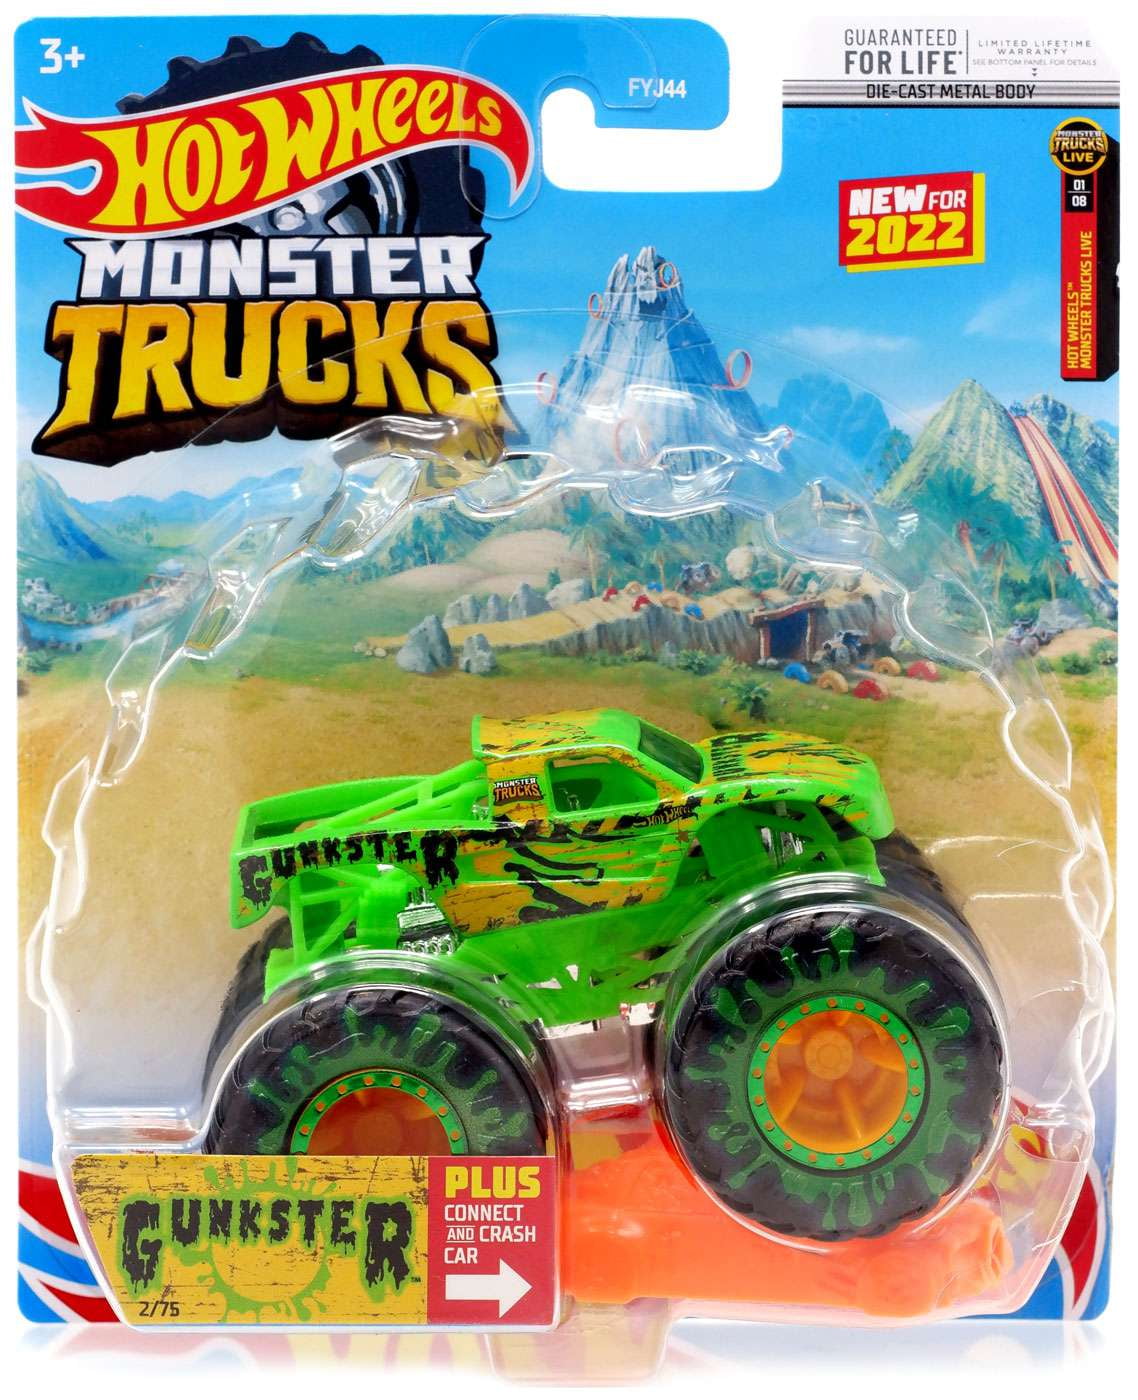 Hot Wheels Monster Truck Racing Ep 47 How the Grinch Stole